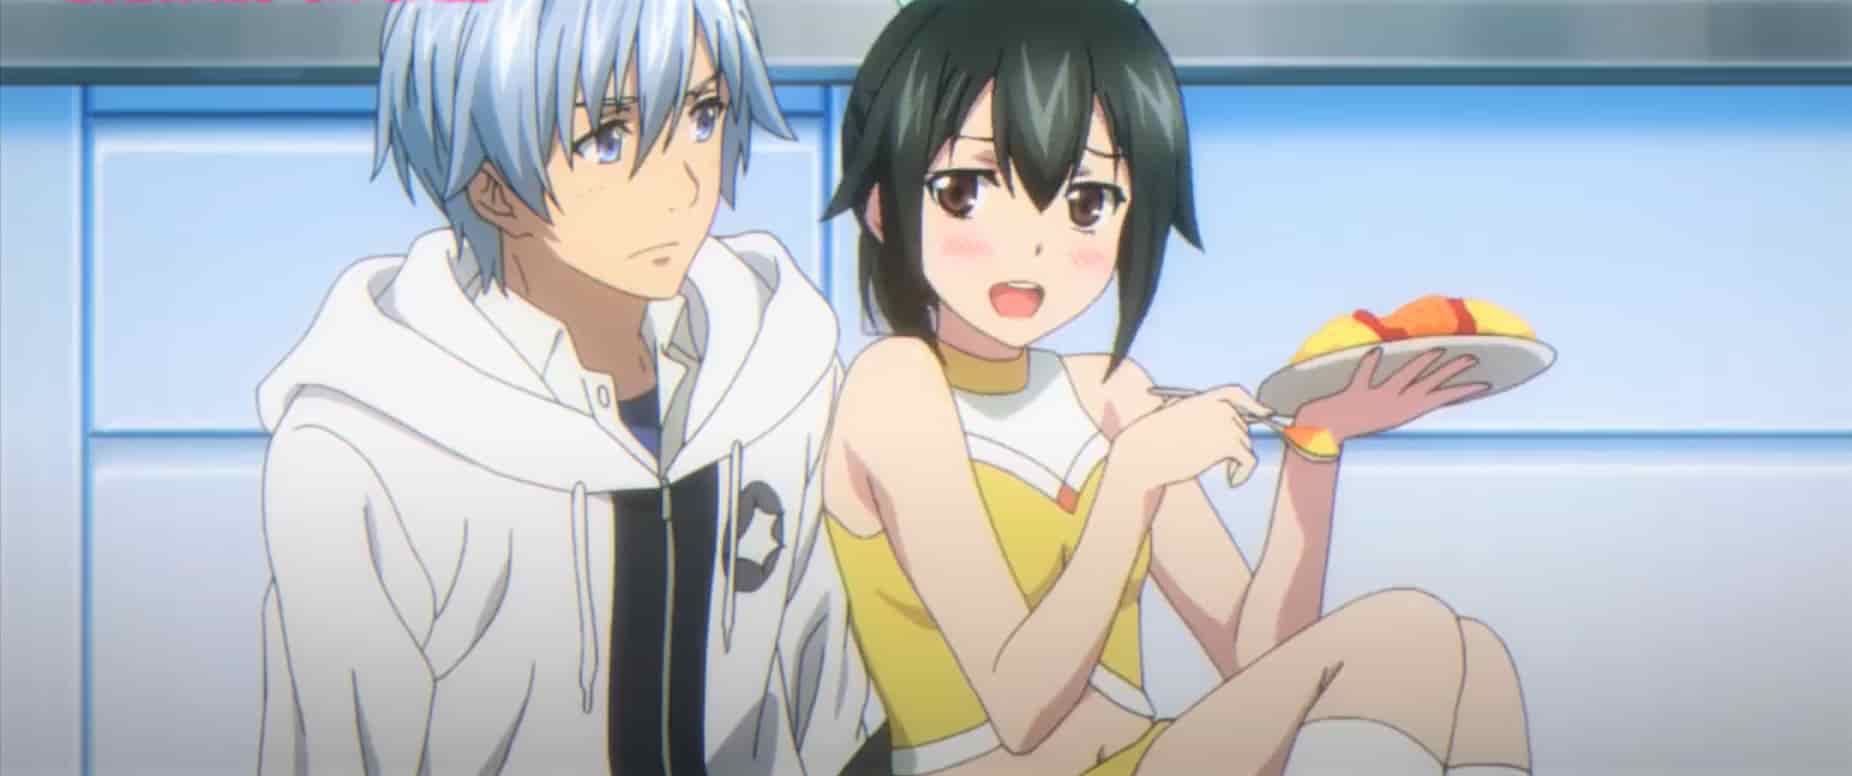 Strike the Blood IV is likely to pick up from episode 9 in 2021